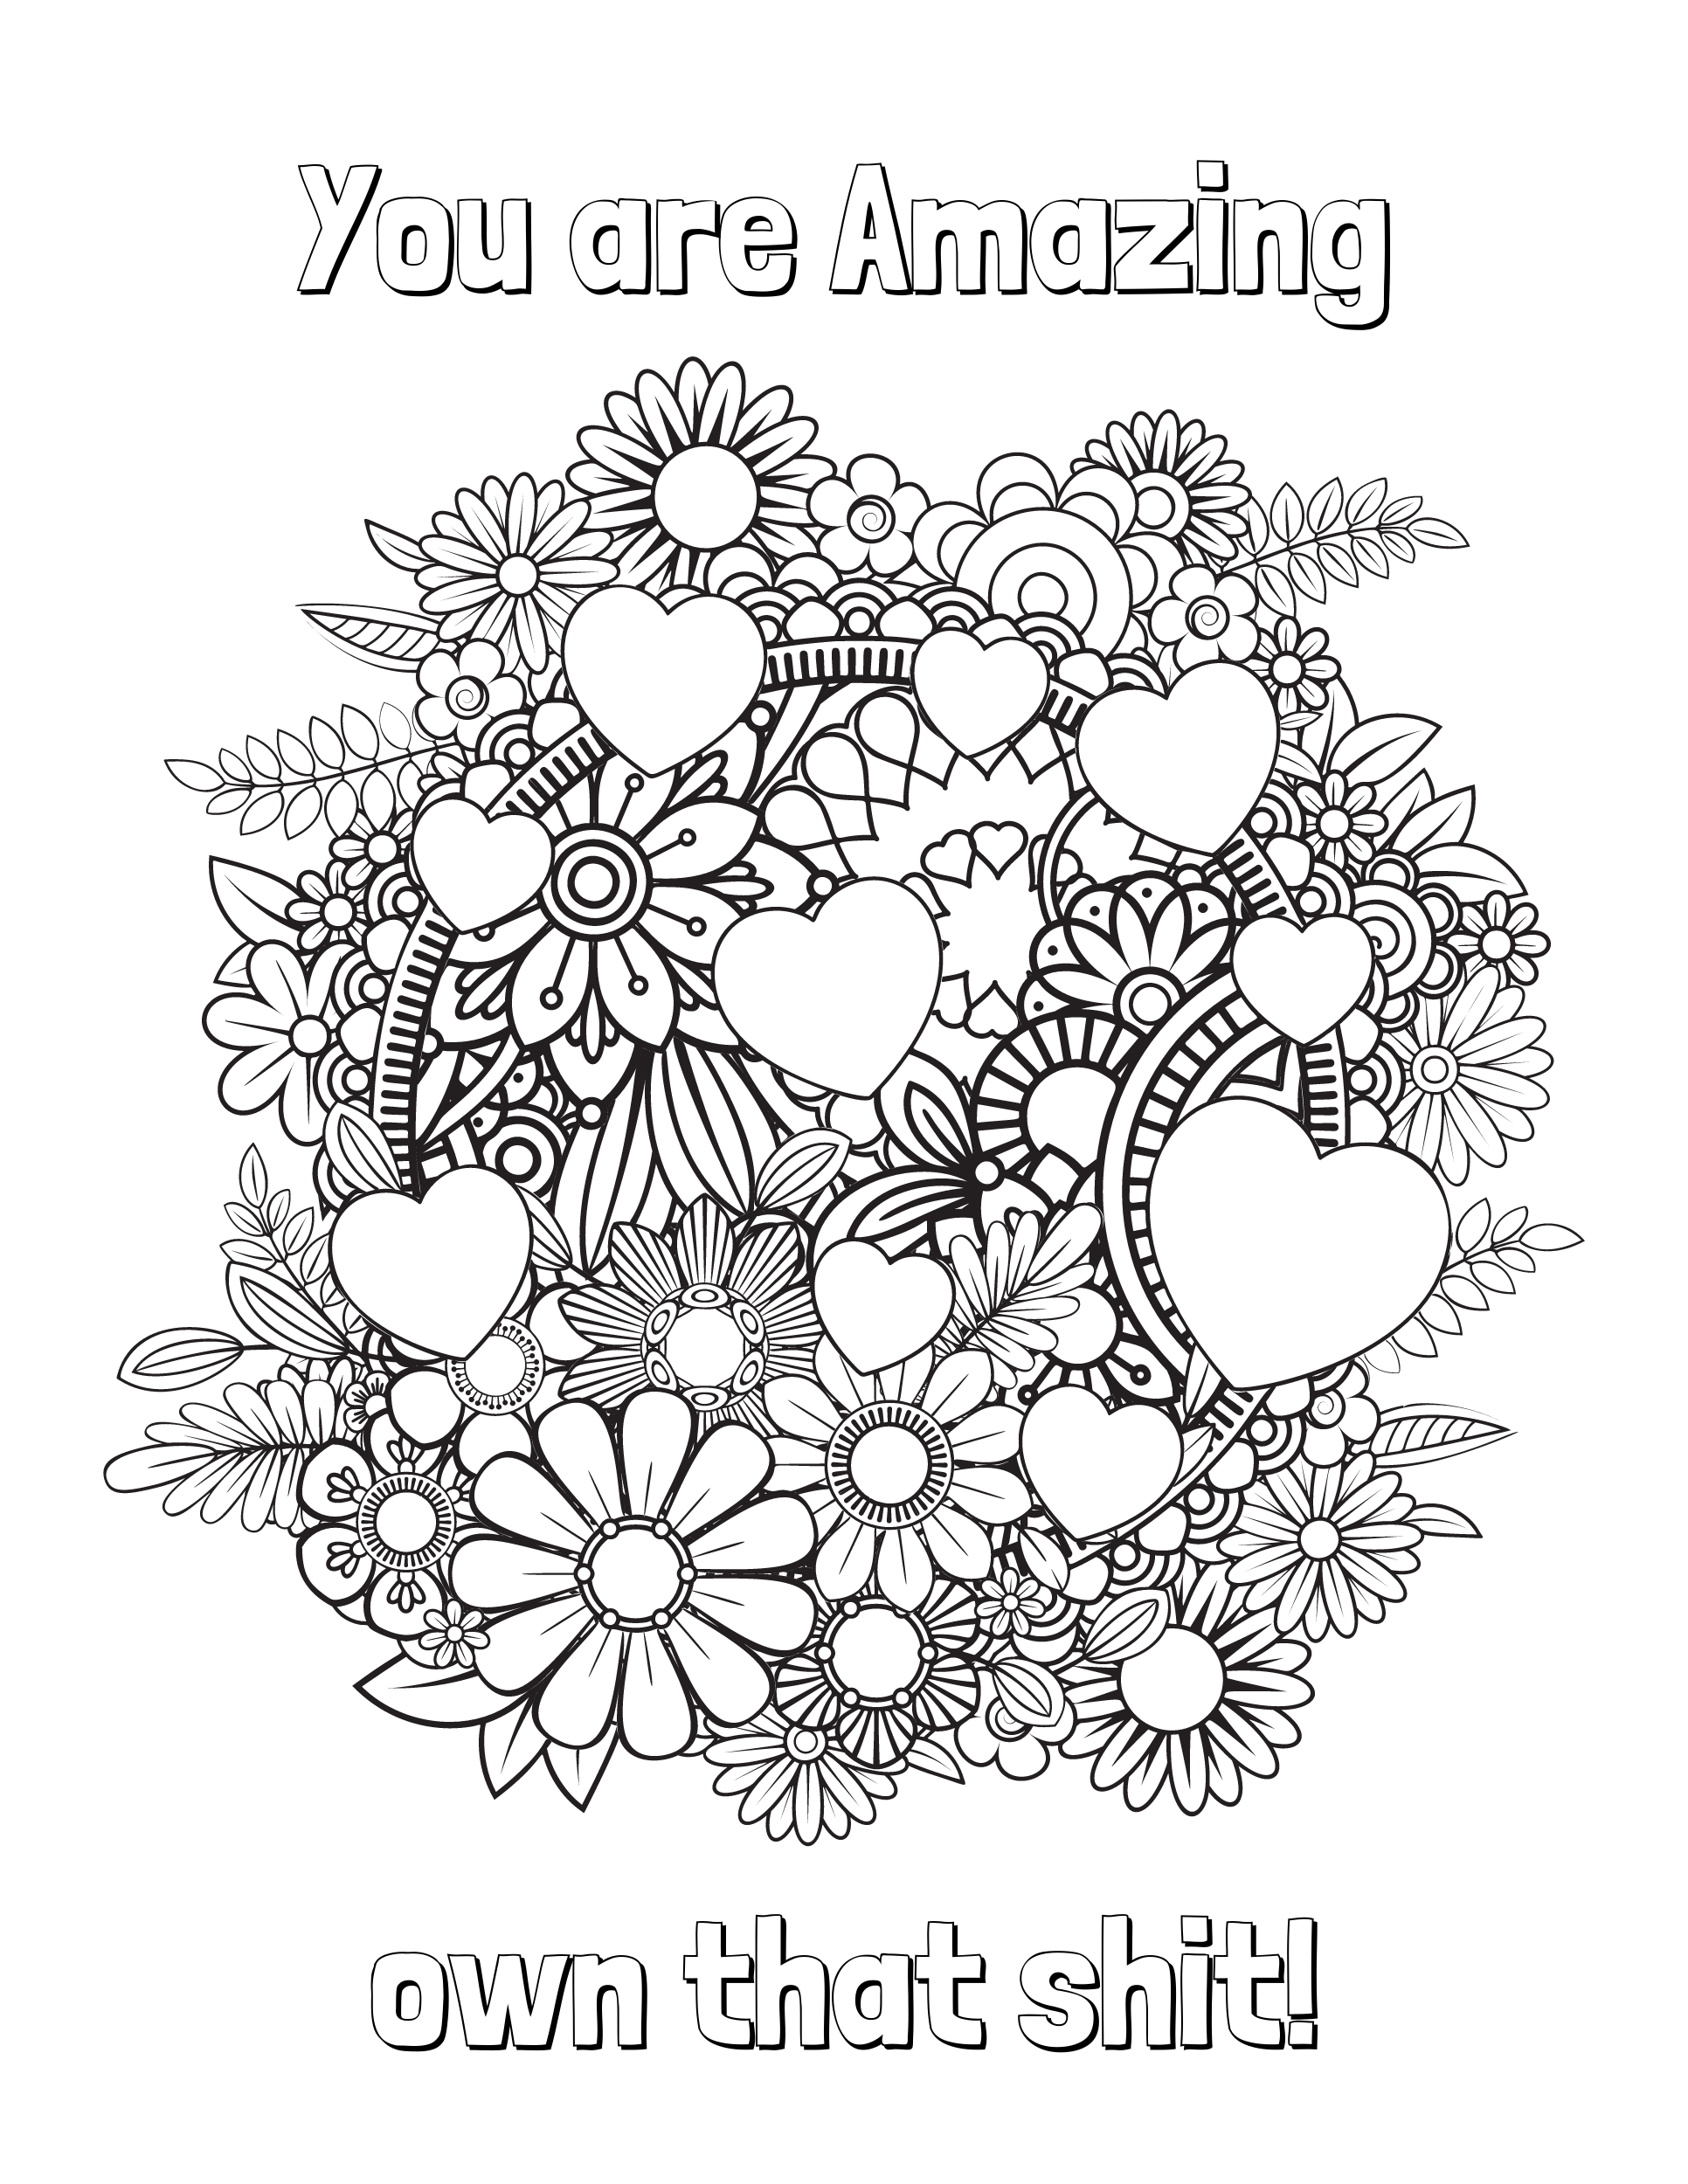 5 Adult SWEAR WORDS Coloring Book Pages